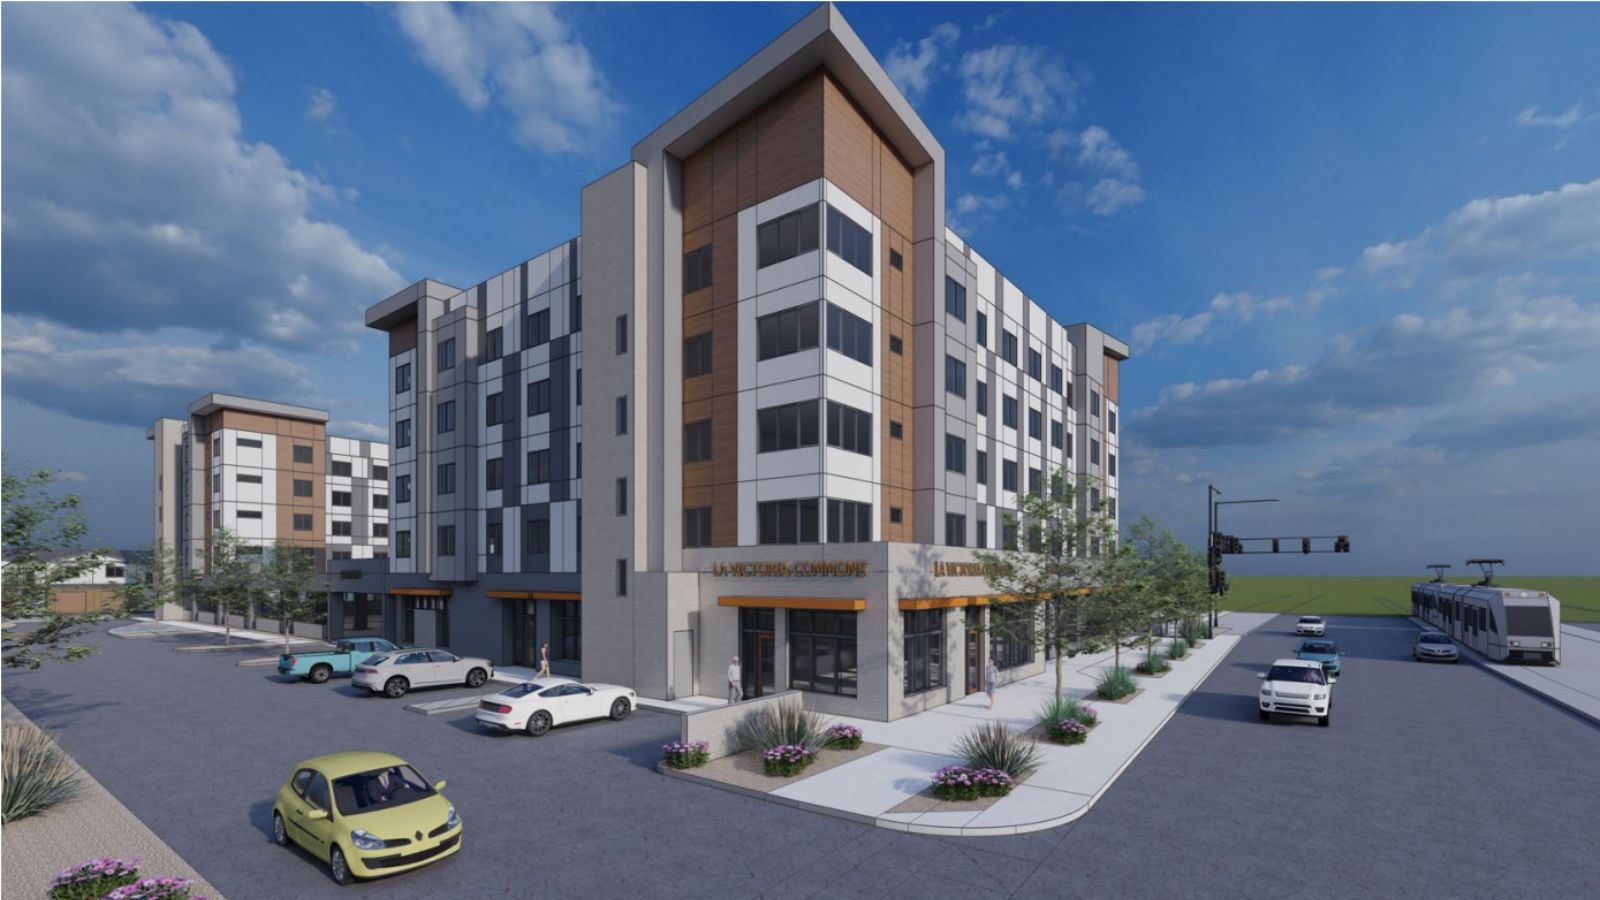 Tempe approves ground leases for affordable housing community